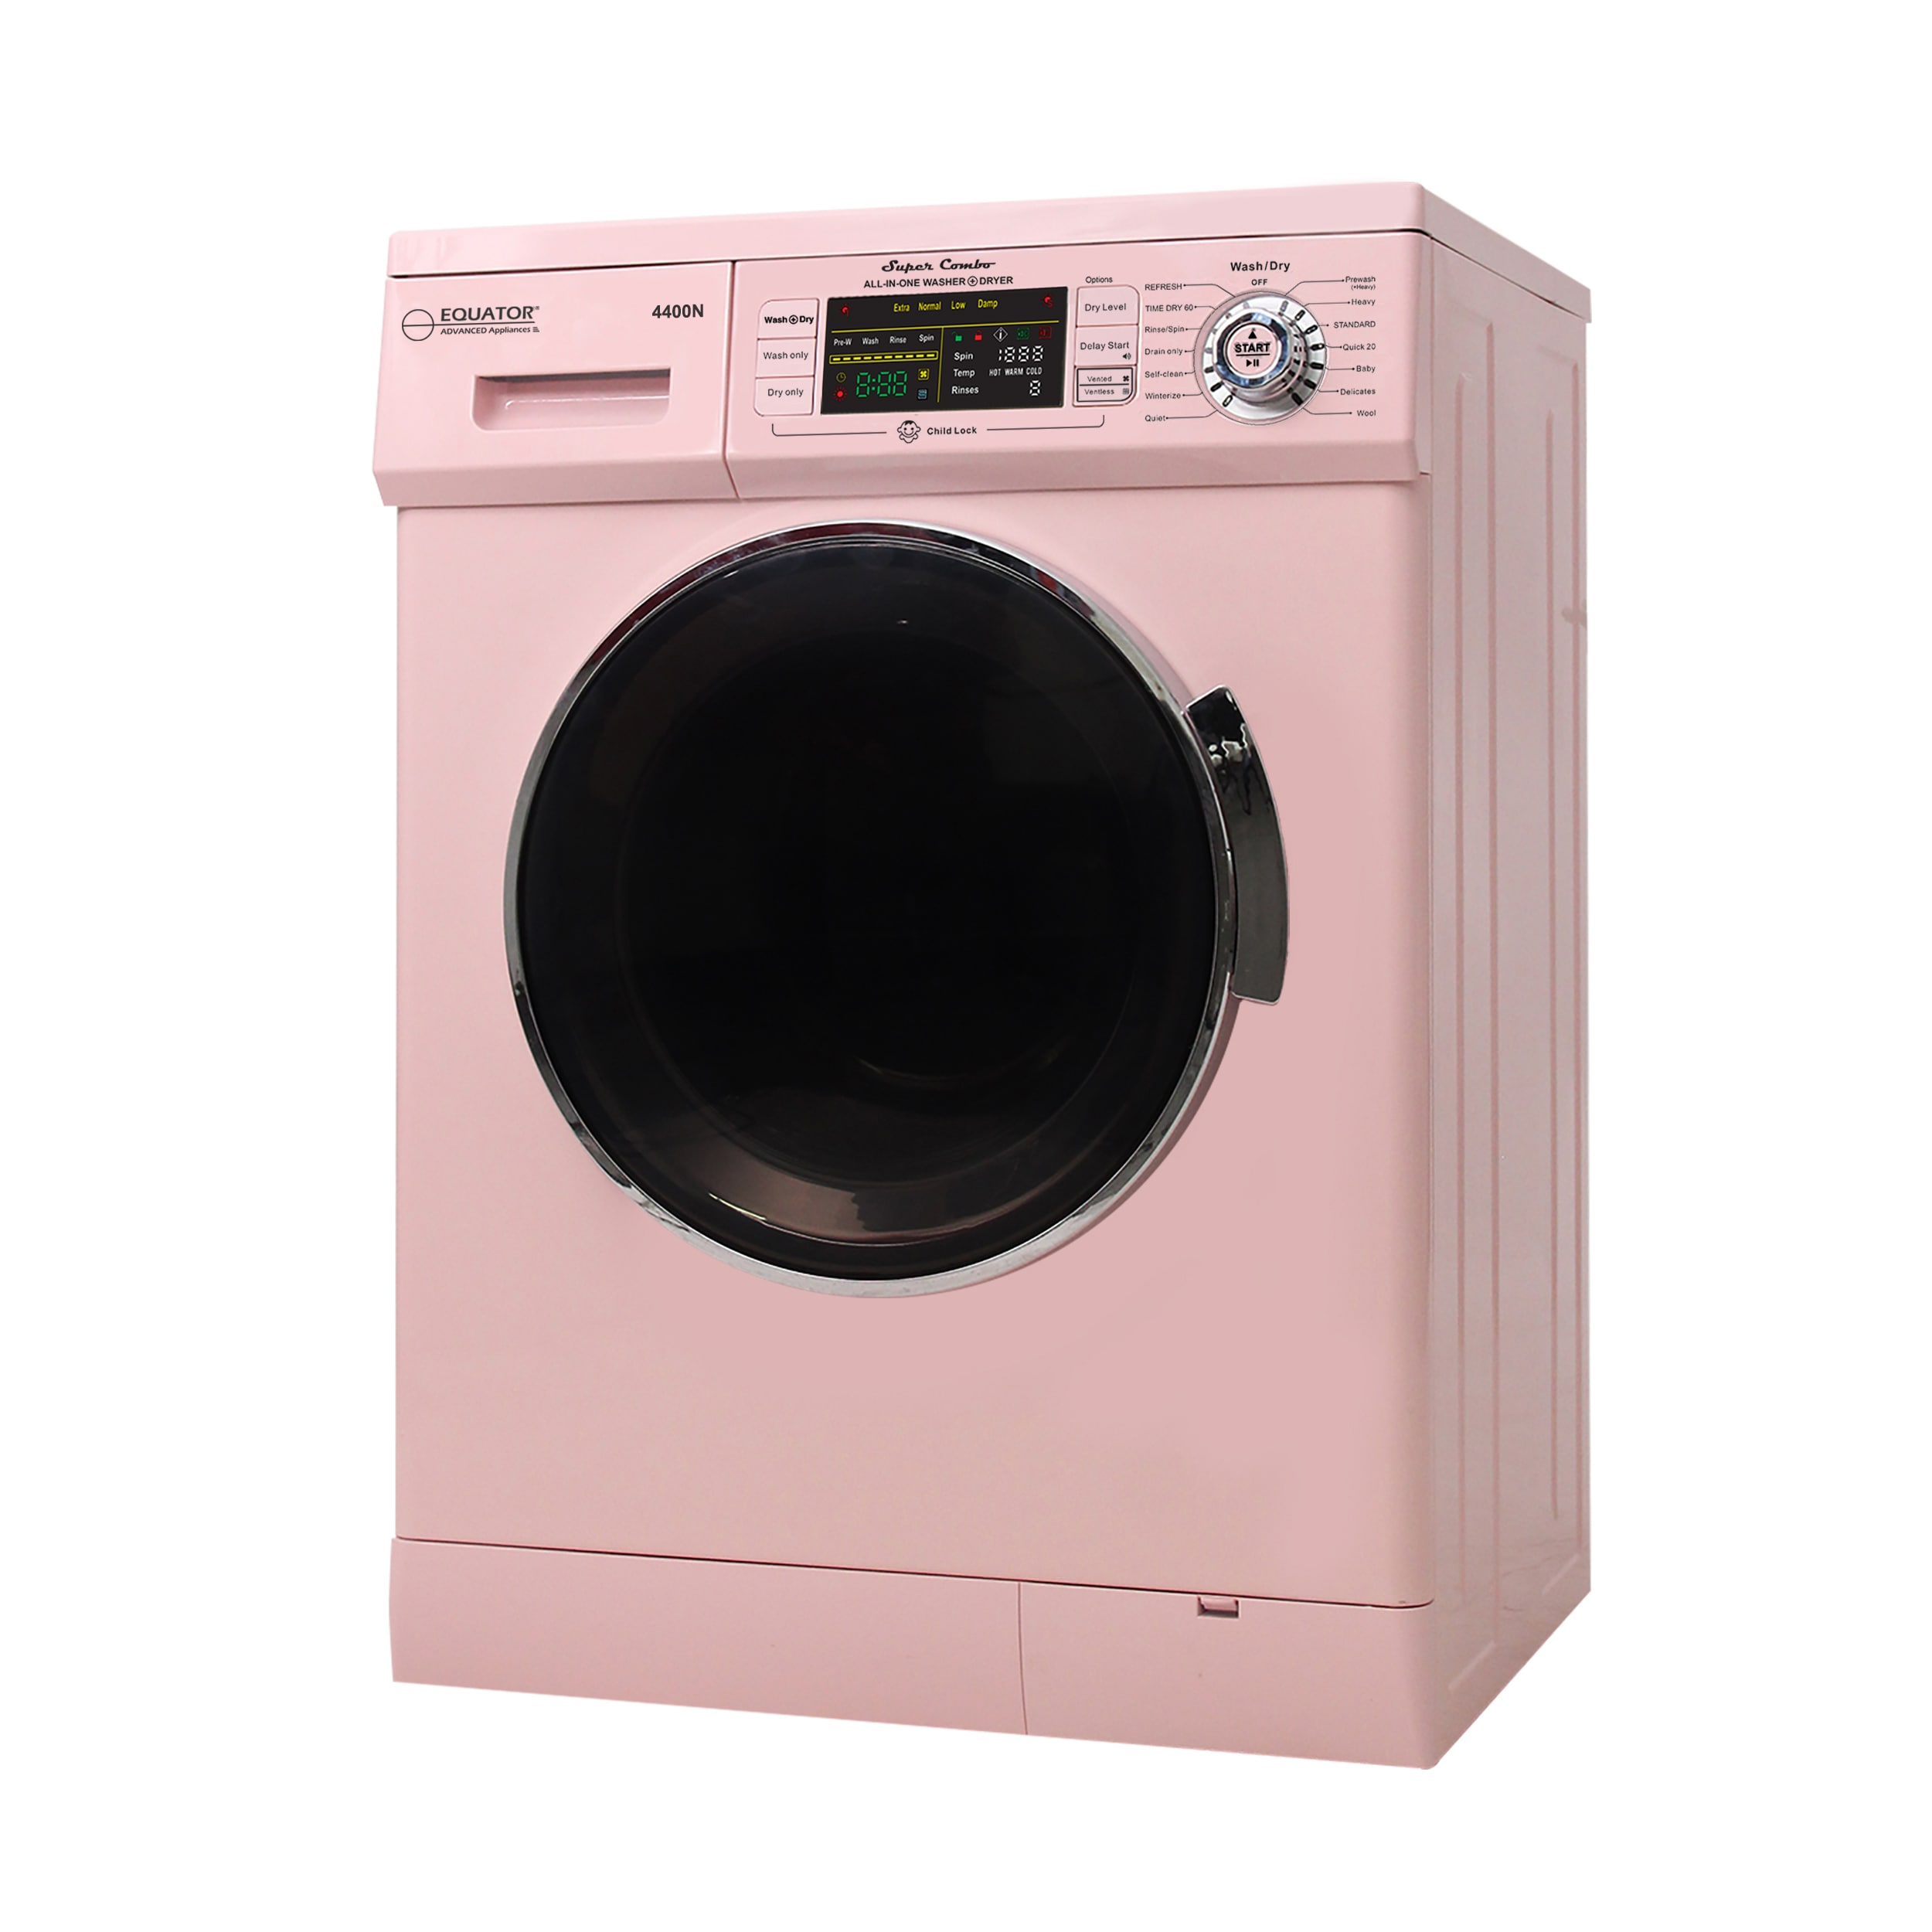 Comfee 2.7-cu ft Capacity White Ventless All-in-One Washer/Dryer